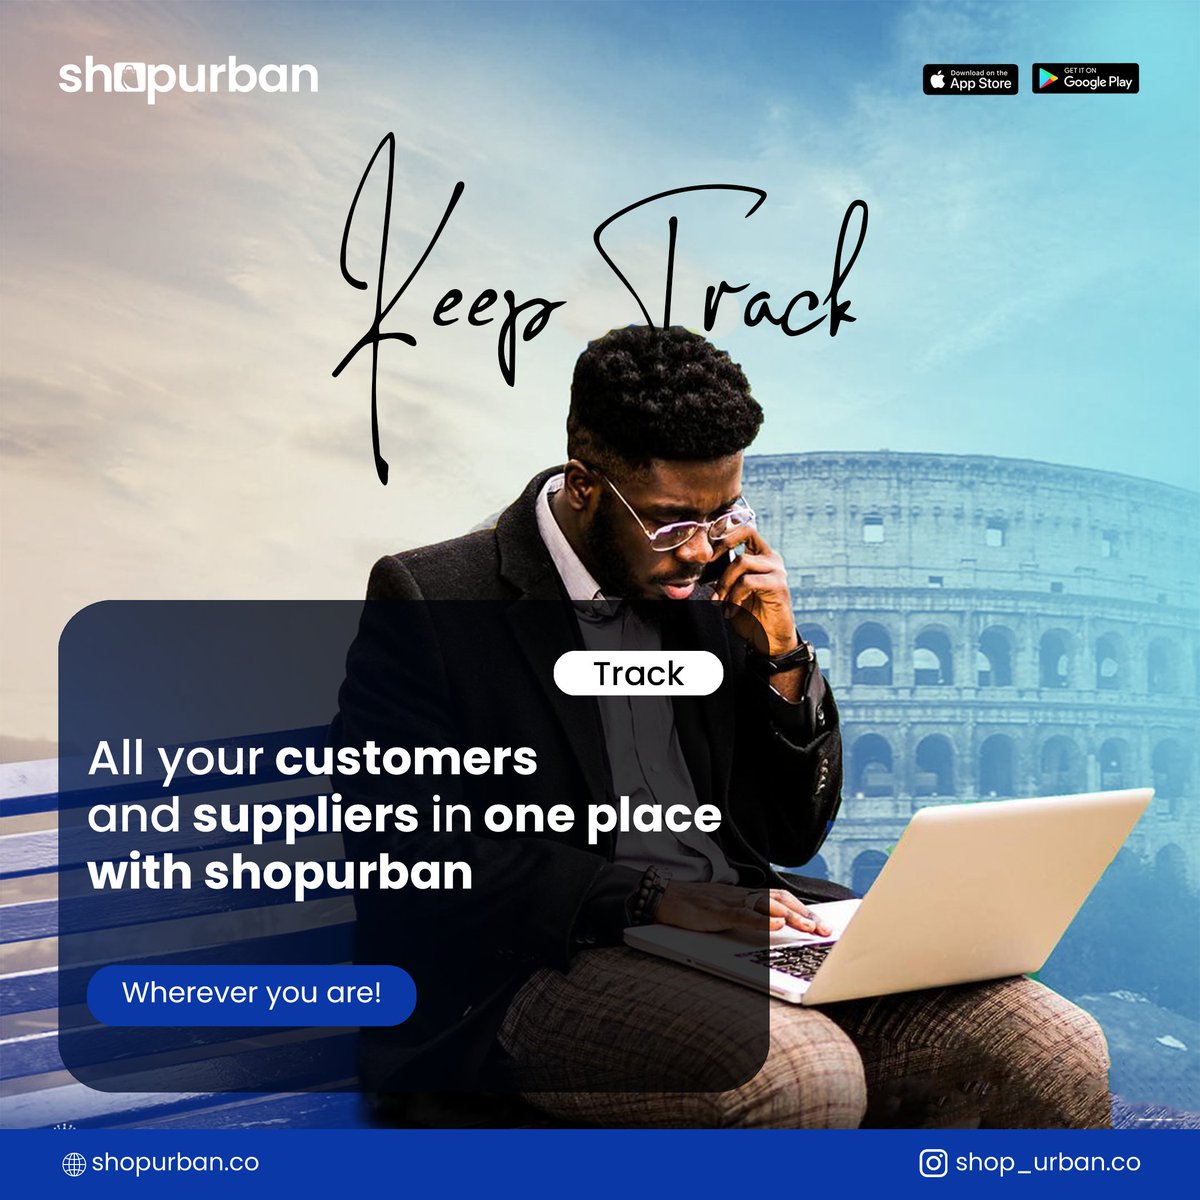 Go on that vacation you always wanted, give your body the rest it deserves, power your business with shopurban.co
#salesapp #businessgrowth #managementsoftware